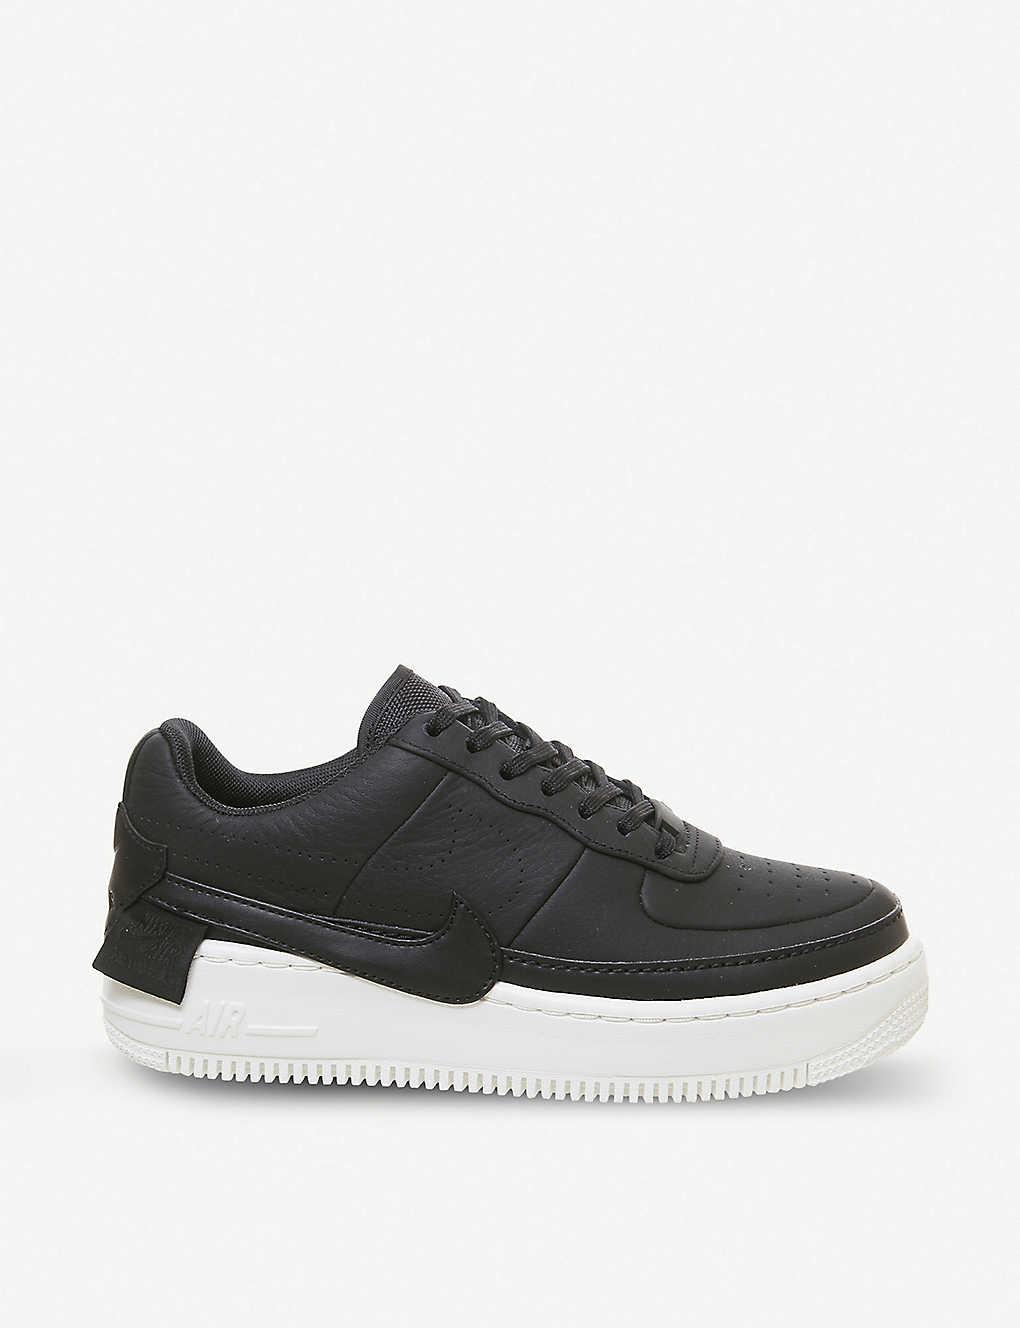 nike air force 1 black jester